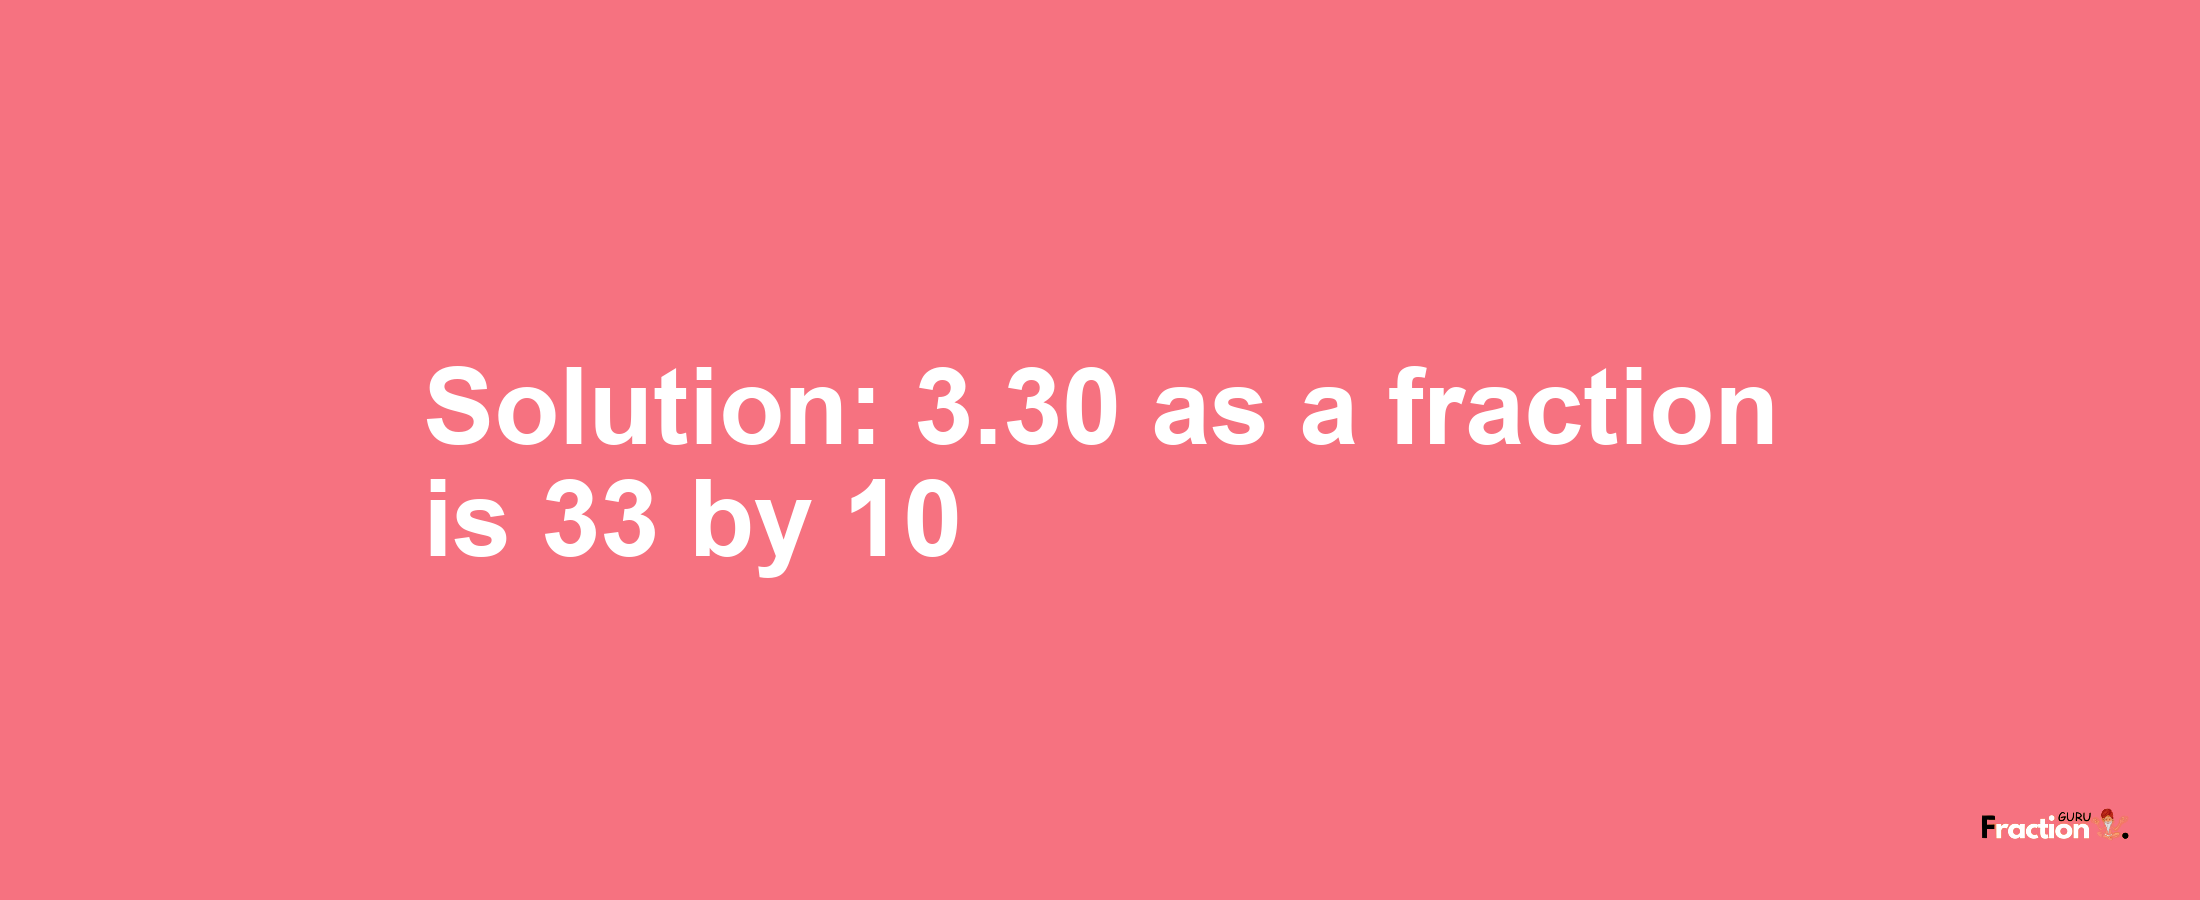 Solution:3.30 as a fraction is 33/10